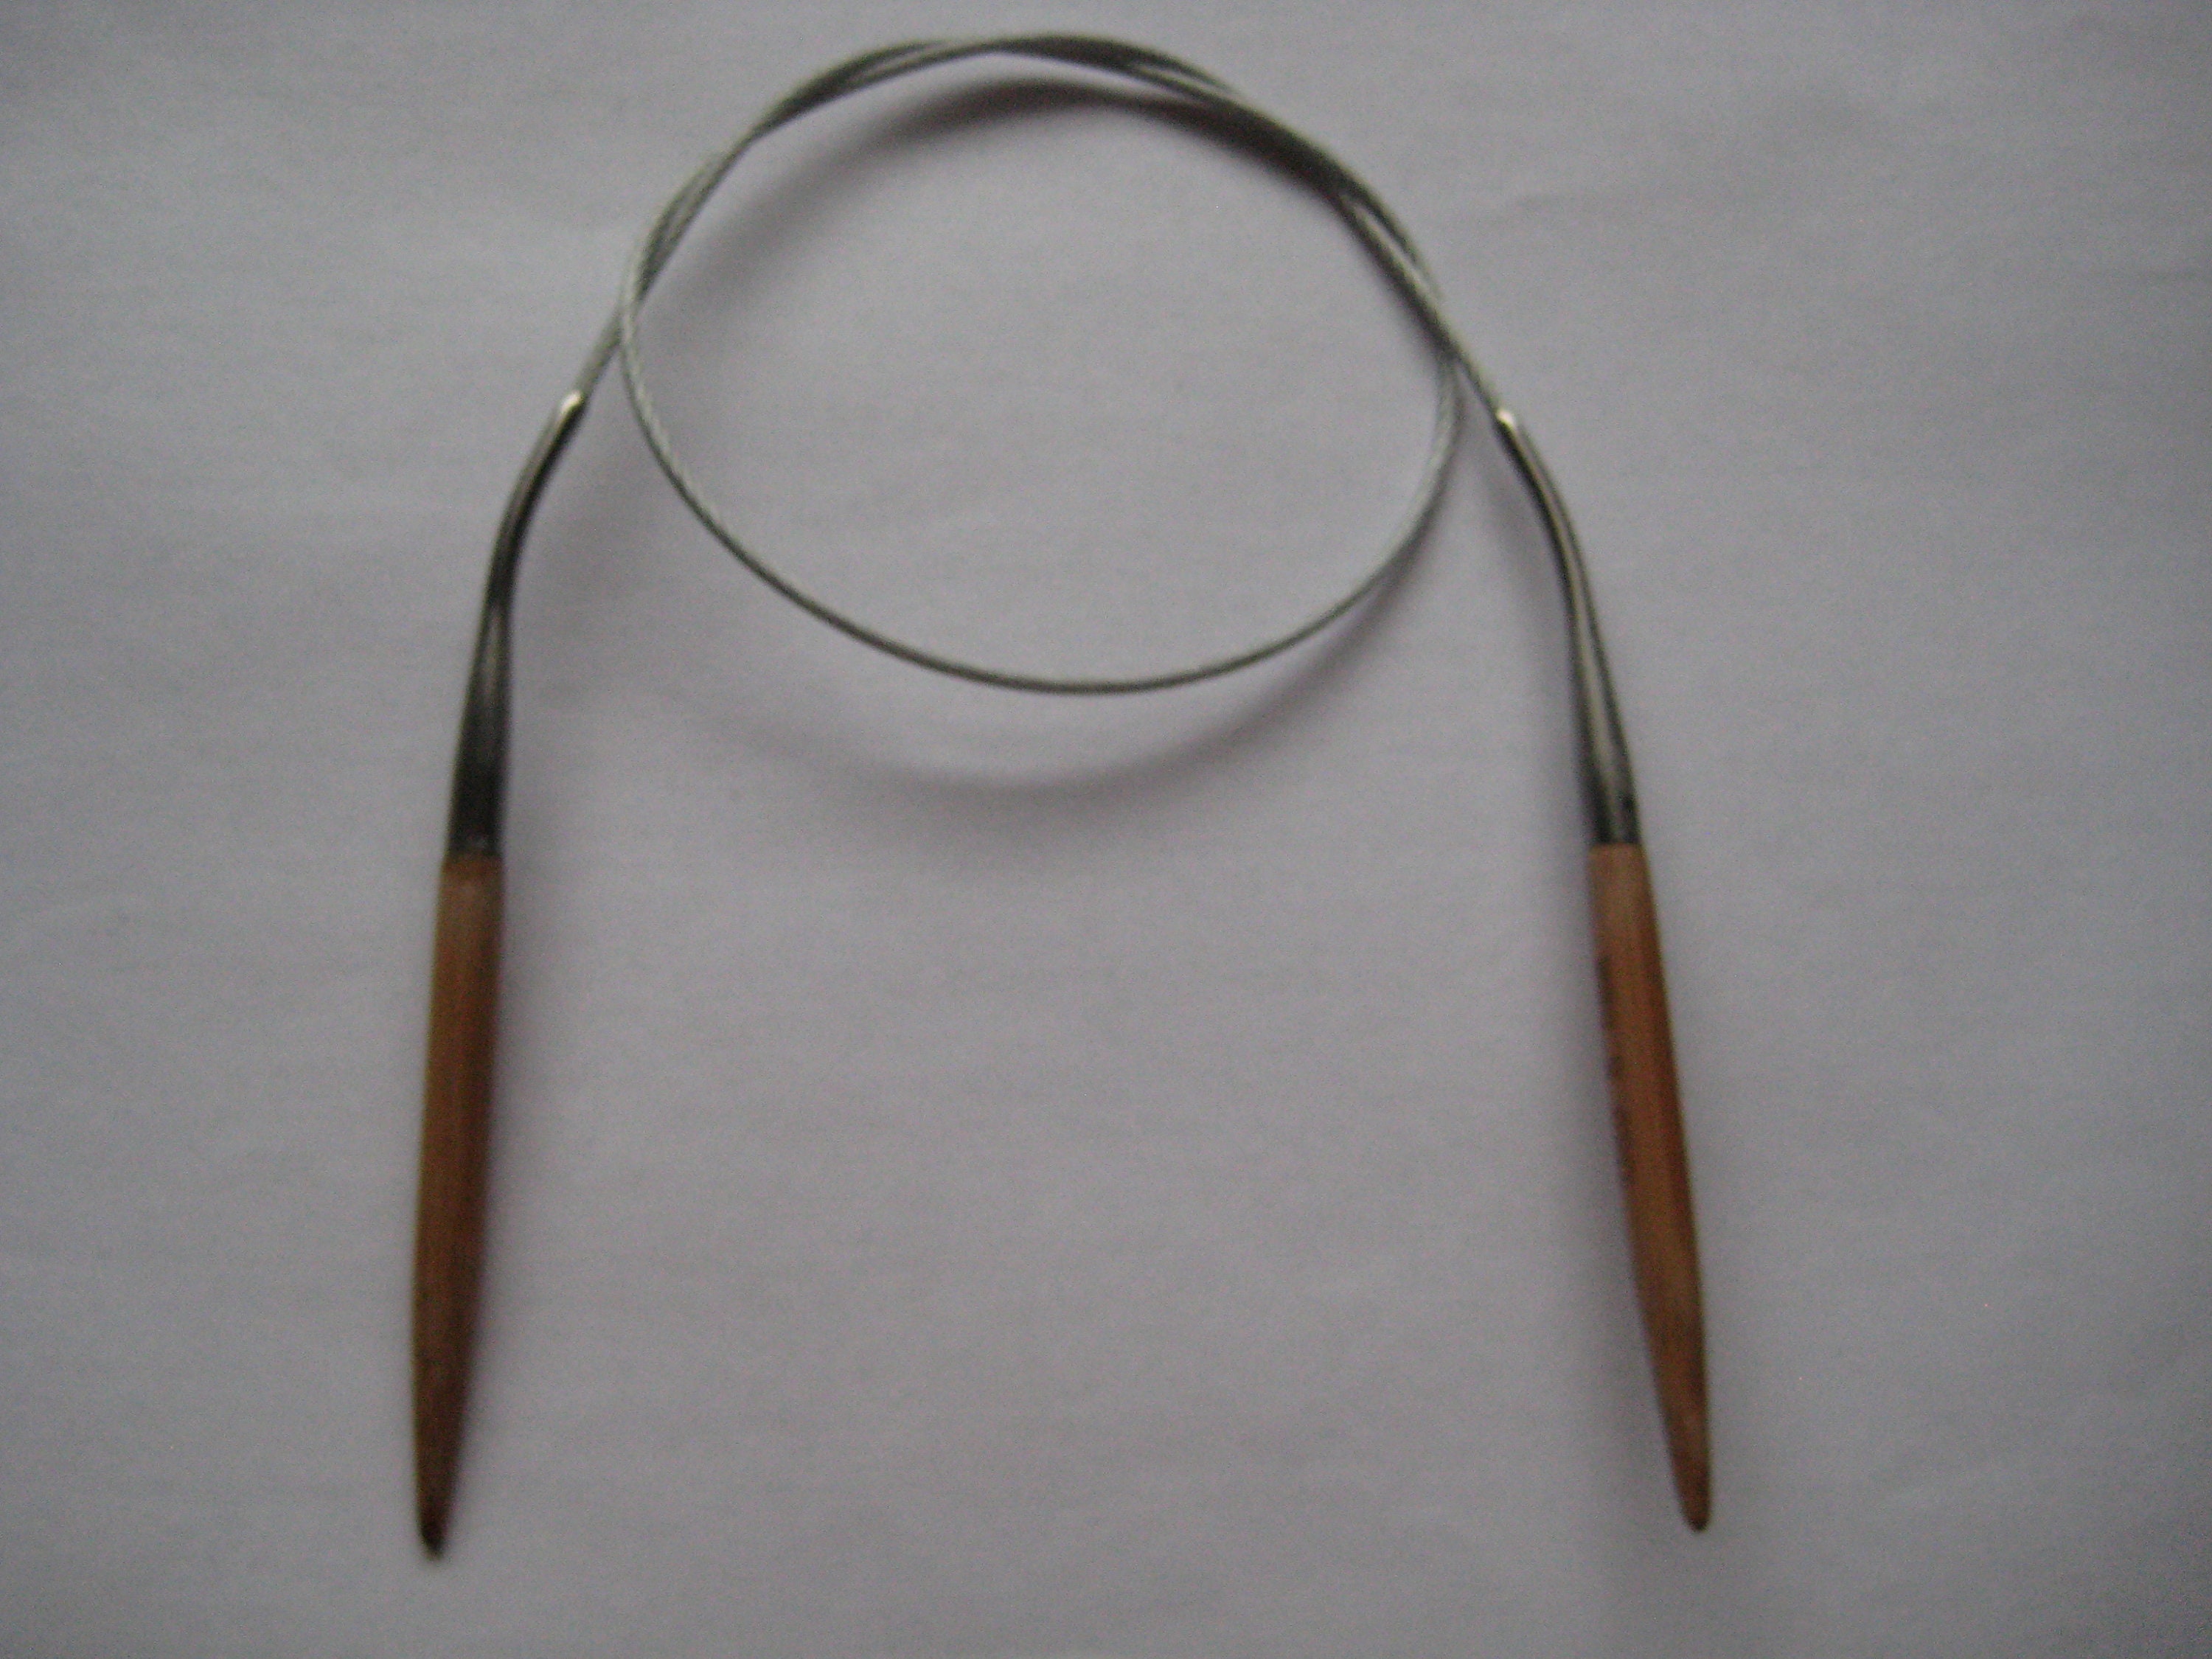 US 80 Size 40 Mm 1,6''/4 Cm Giant Circular Knitting Needles With Silicon  Tube. Big Wooden Needles for Extreme Knitting. 